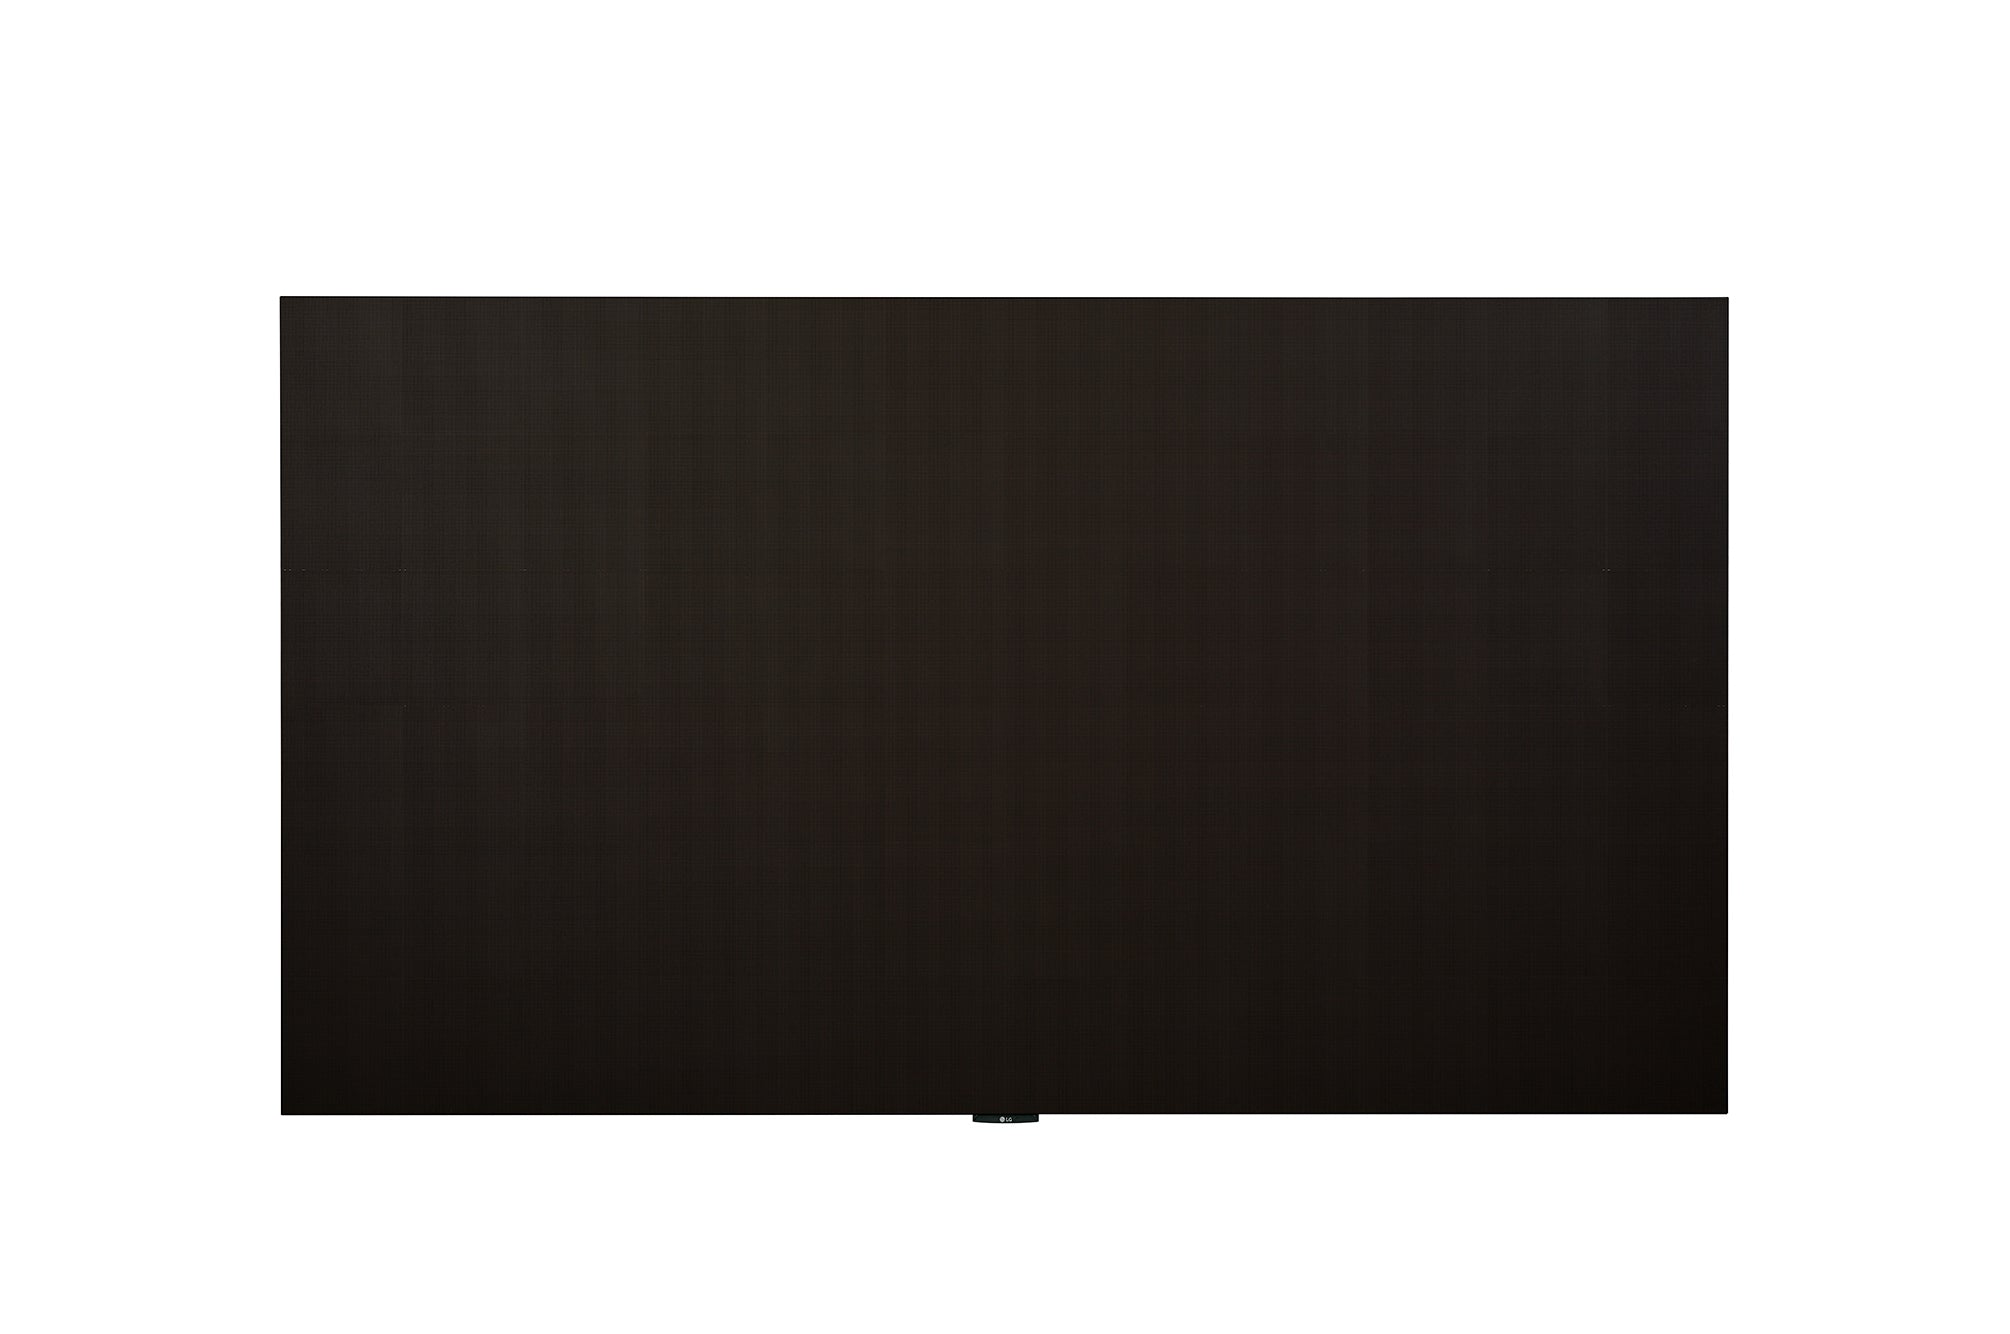 LG 136" LAEC015-GN All-in-one Smart Series Full HD LED Signage